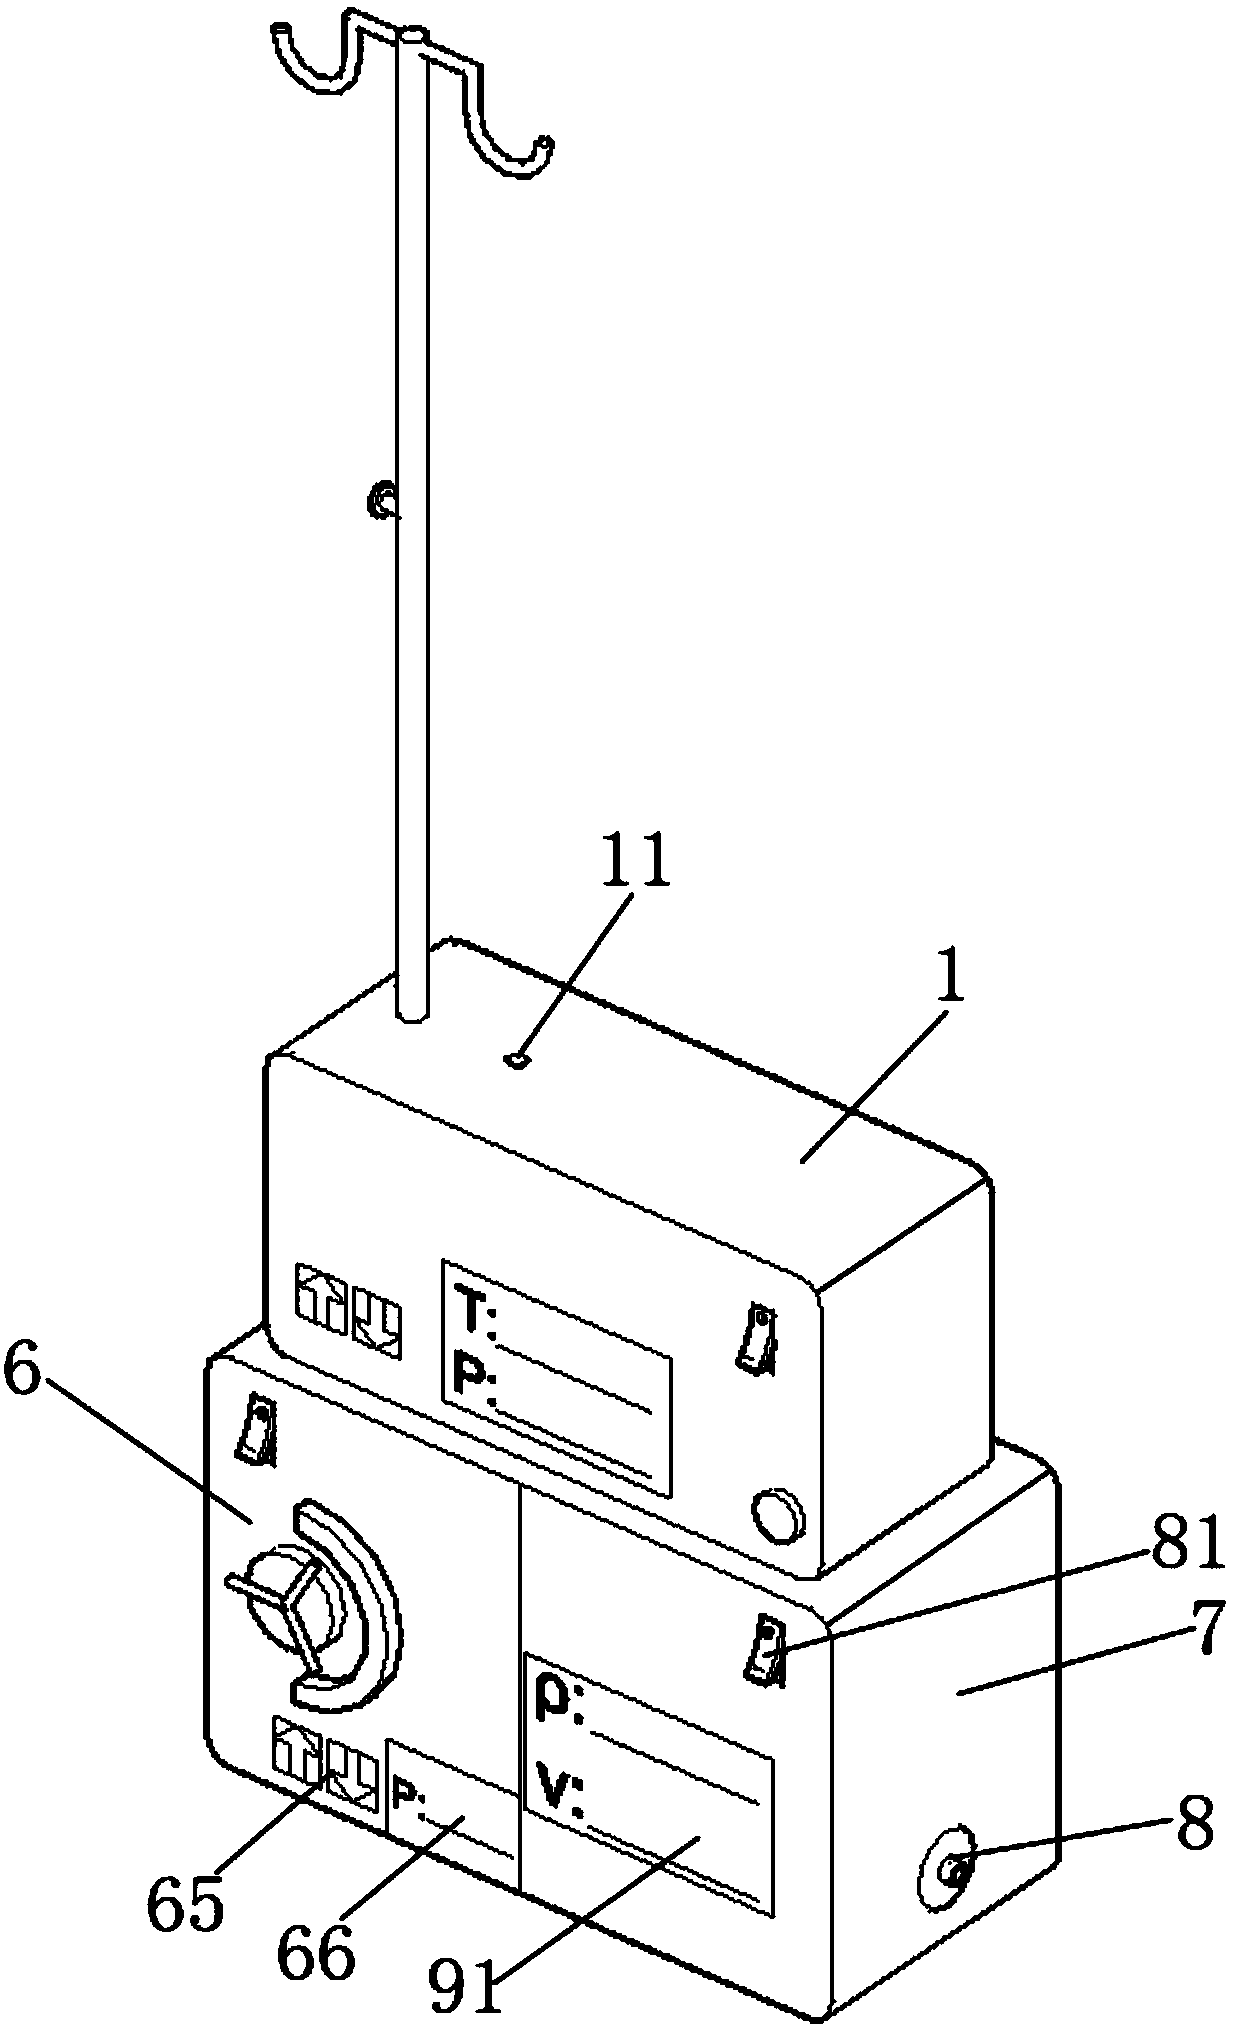 Heatable bladder irrigation device with constant pressure perfusion